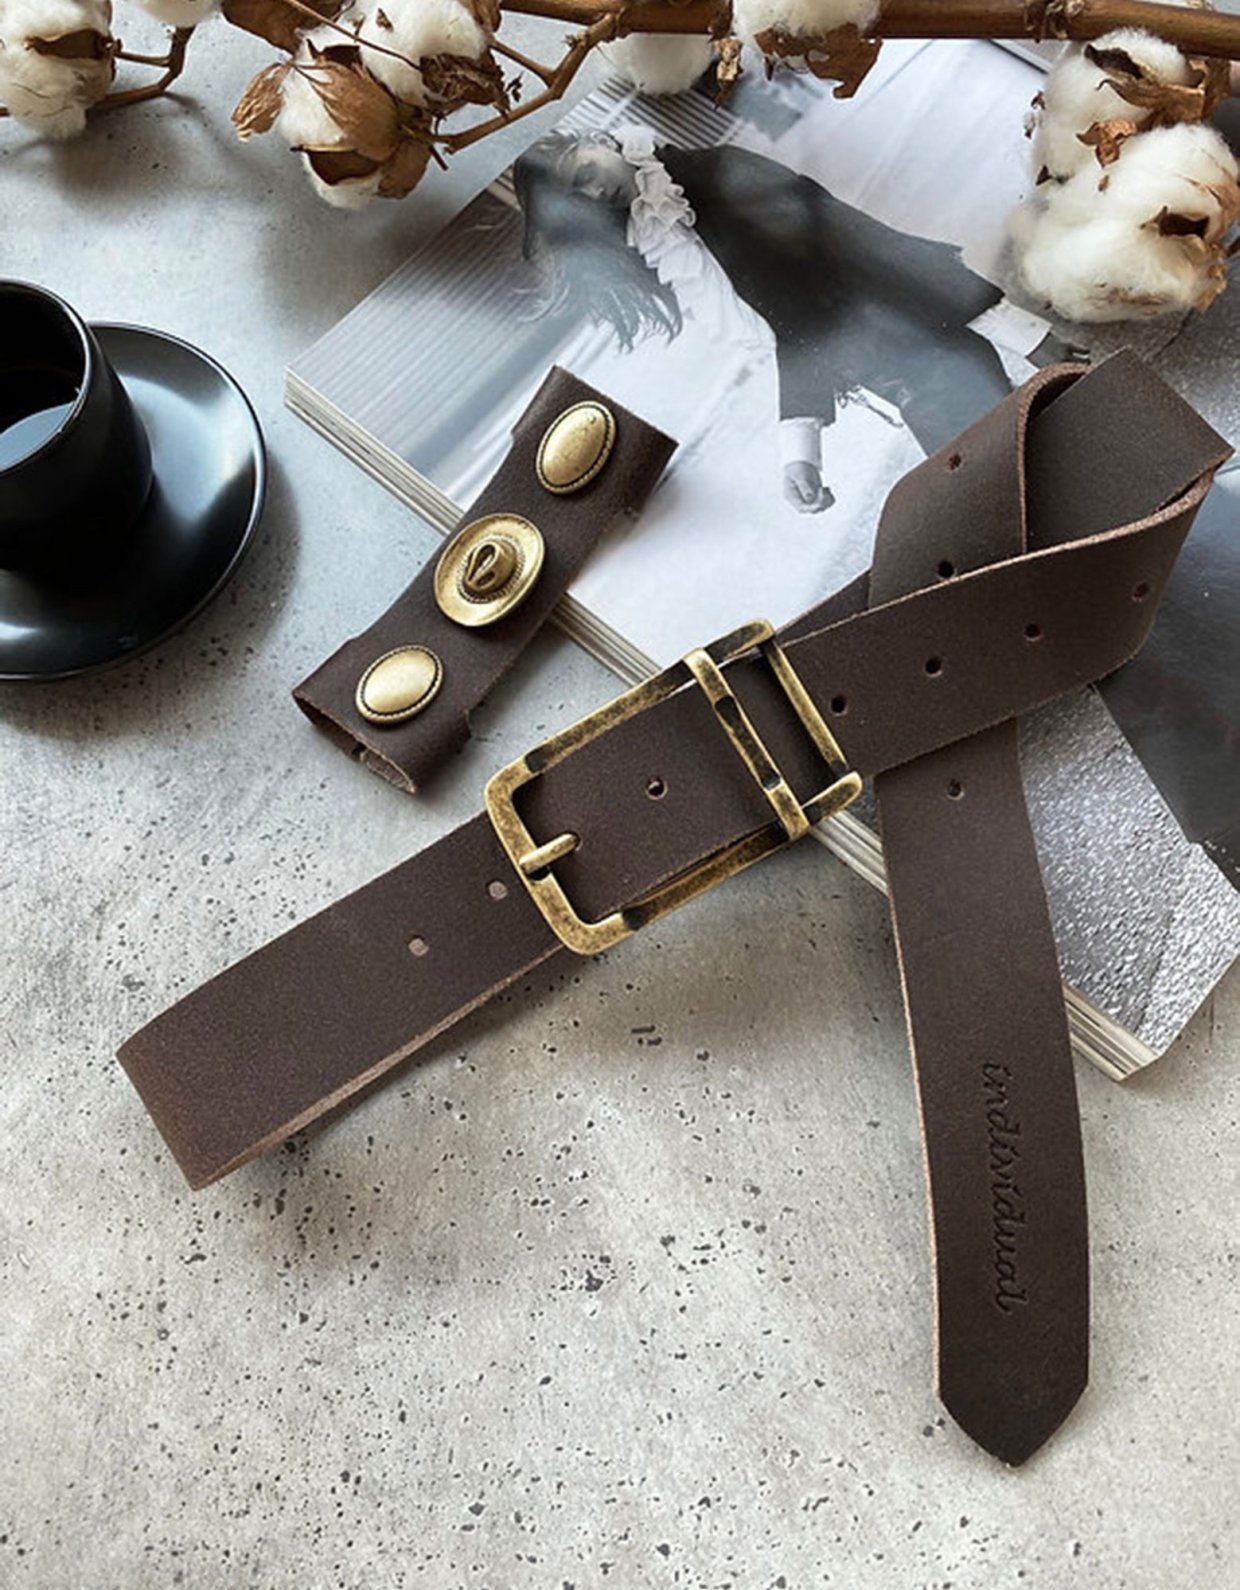 Individual Art Leather Fame leather belt brown